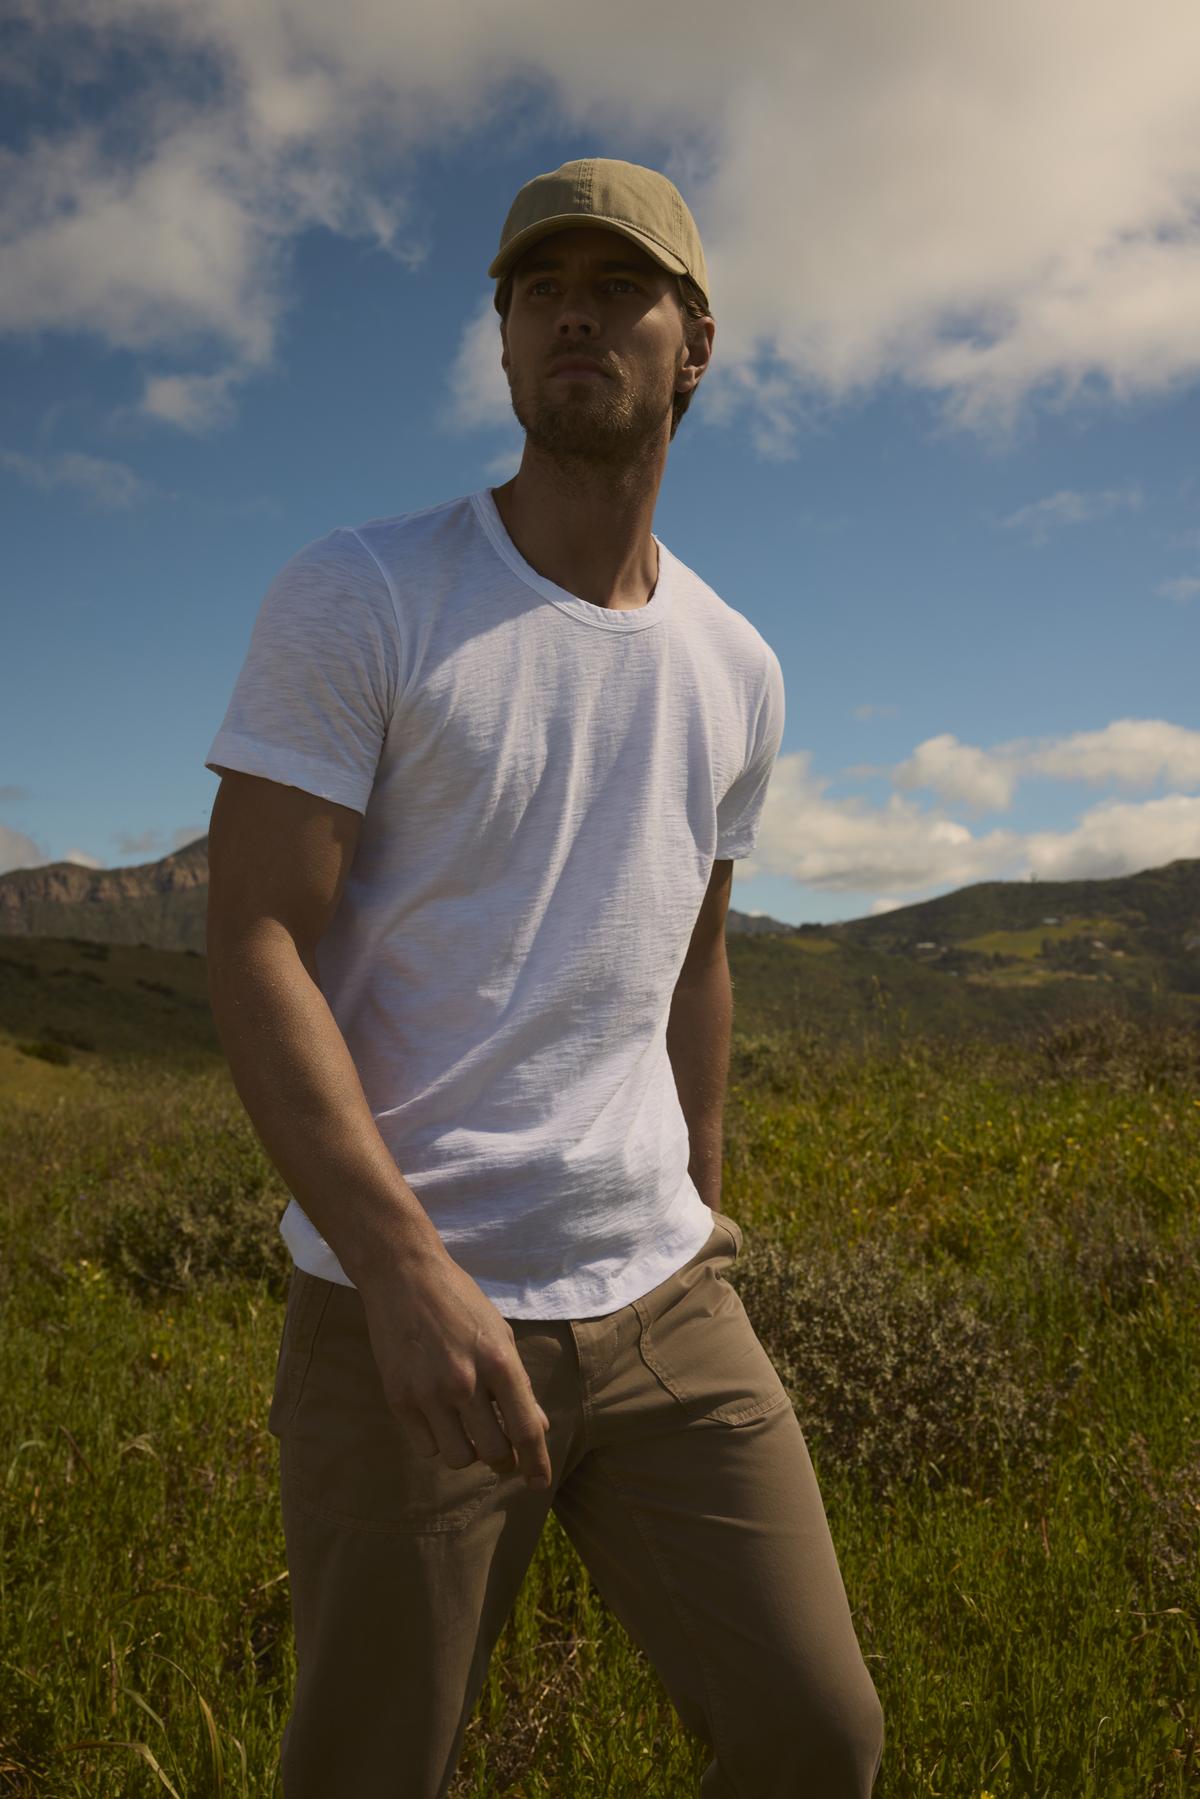   A man in a white Velvet by Graham & Spencer t-shirt and khaki pants stands in a field with a picturesque, cloudy sky above and mountains in the distance. He is wearing a tailored jacket and a cap, looking away. 